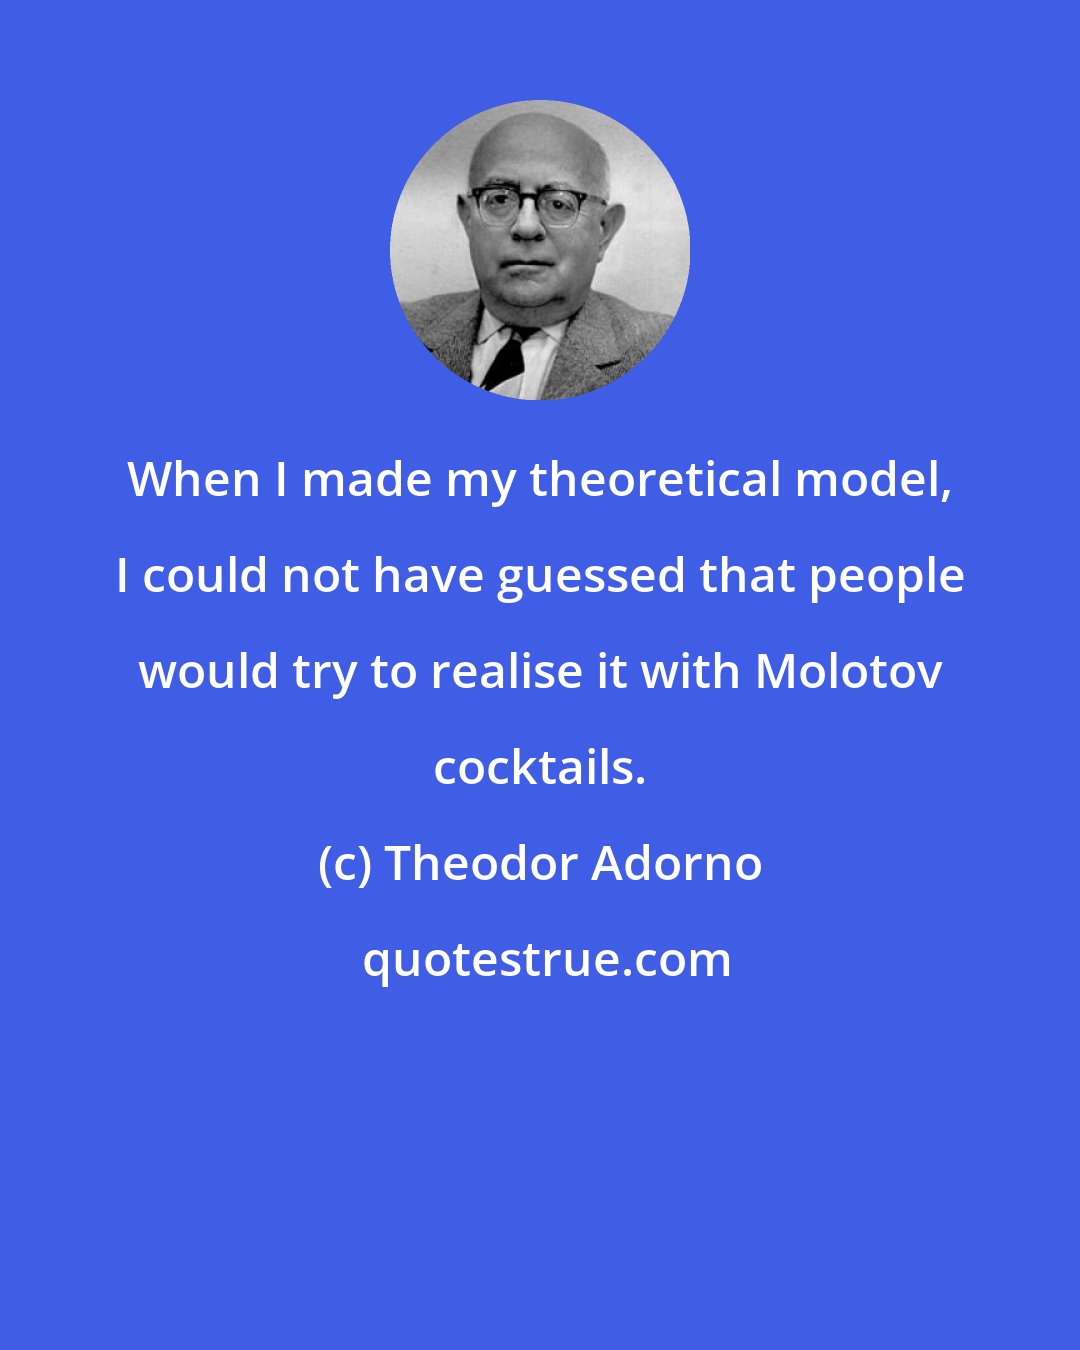 Theodor Adorno: When I made my theoretical model, I could not have guessed that people would try to realise it with Molotov cocktails.